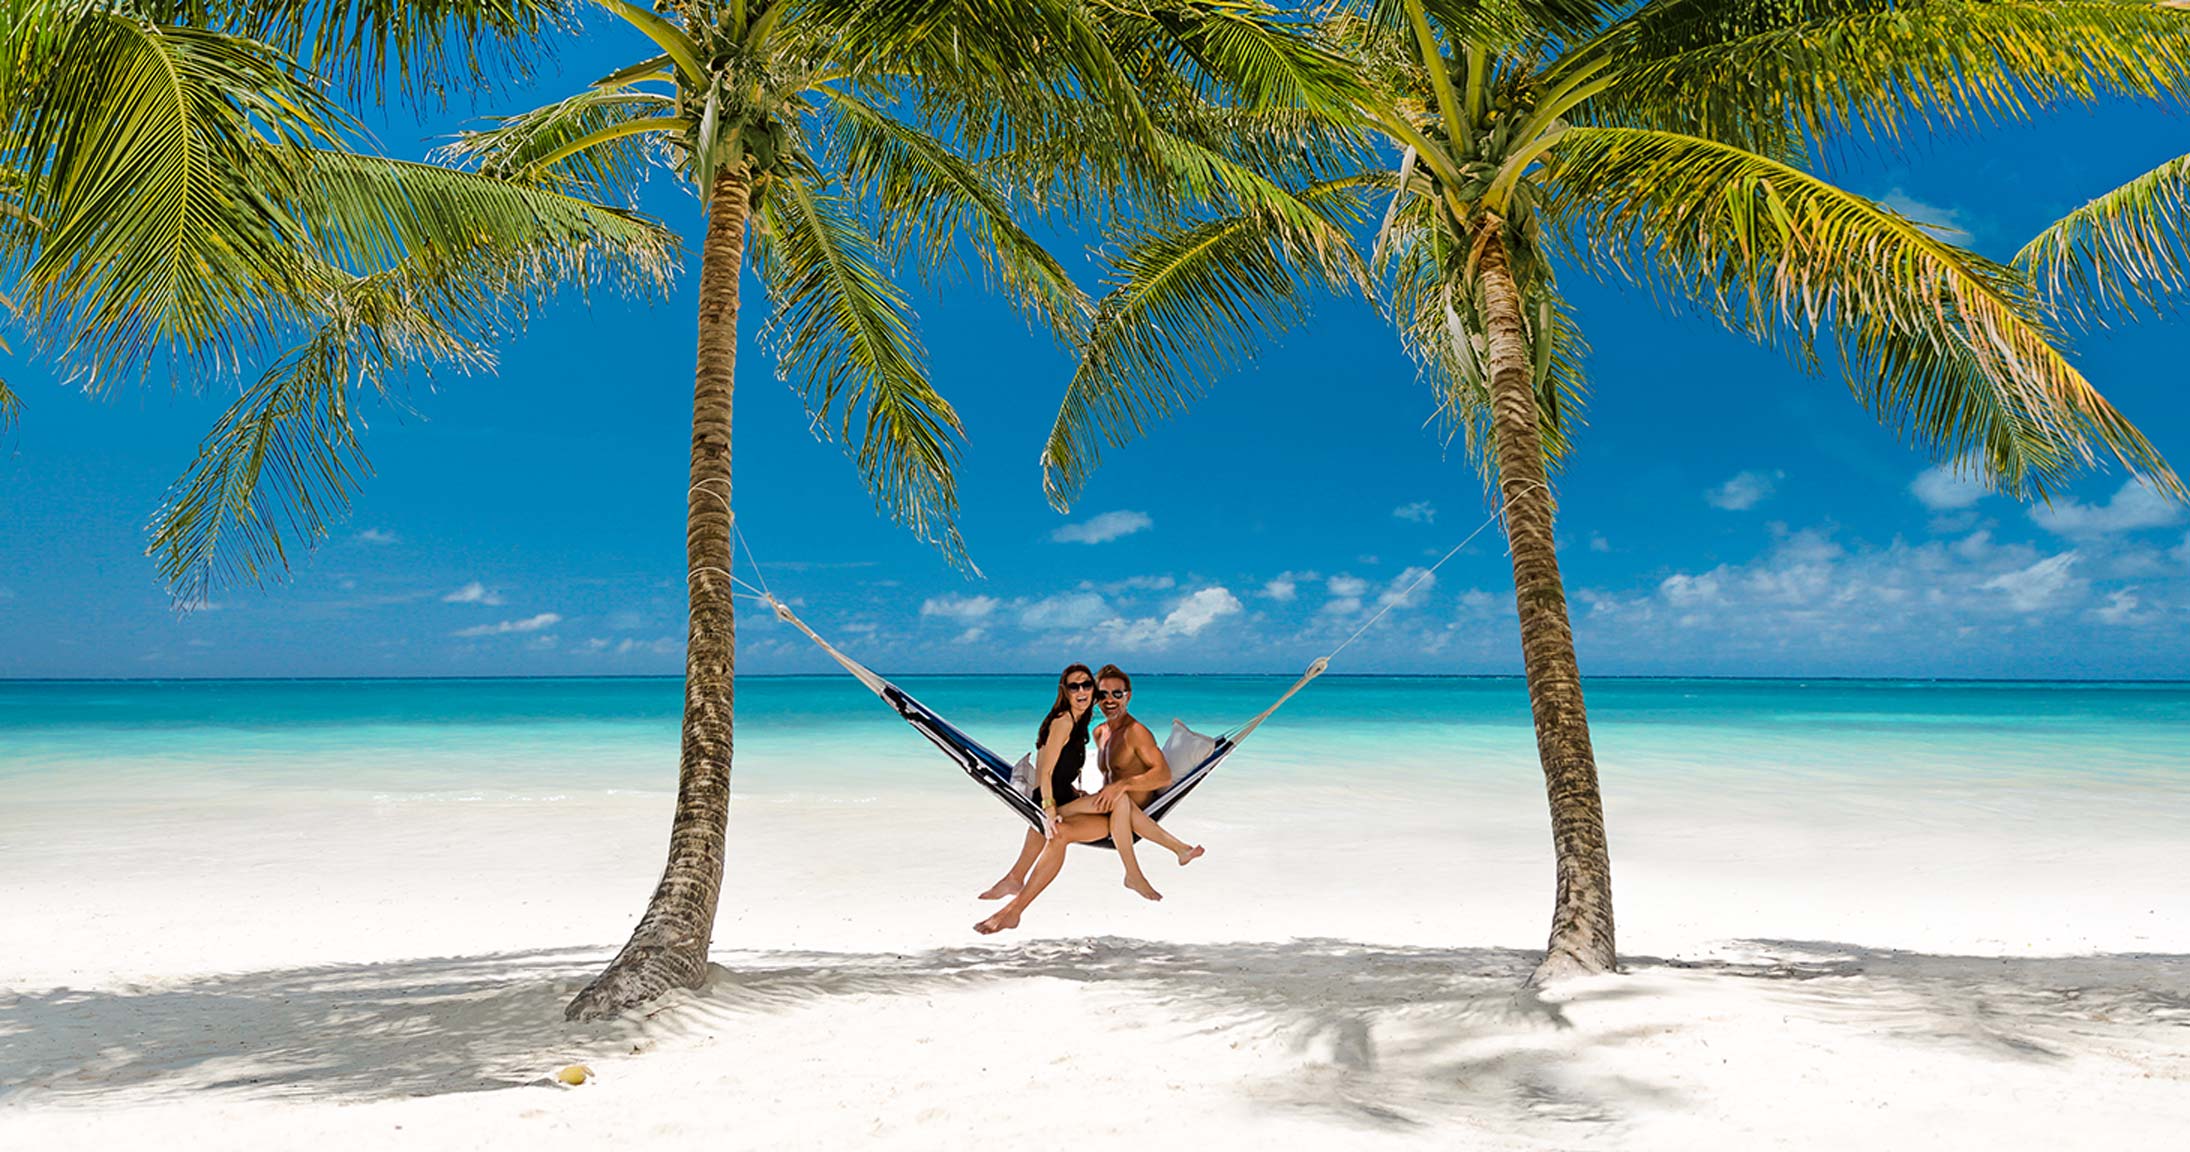 Sandals & Beaches Resorts: Your Latest Luxury Escapes News and Specials Milled